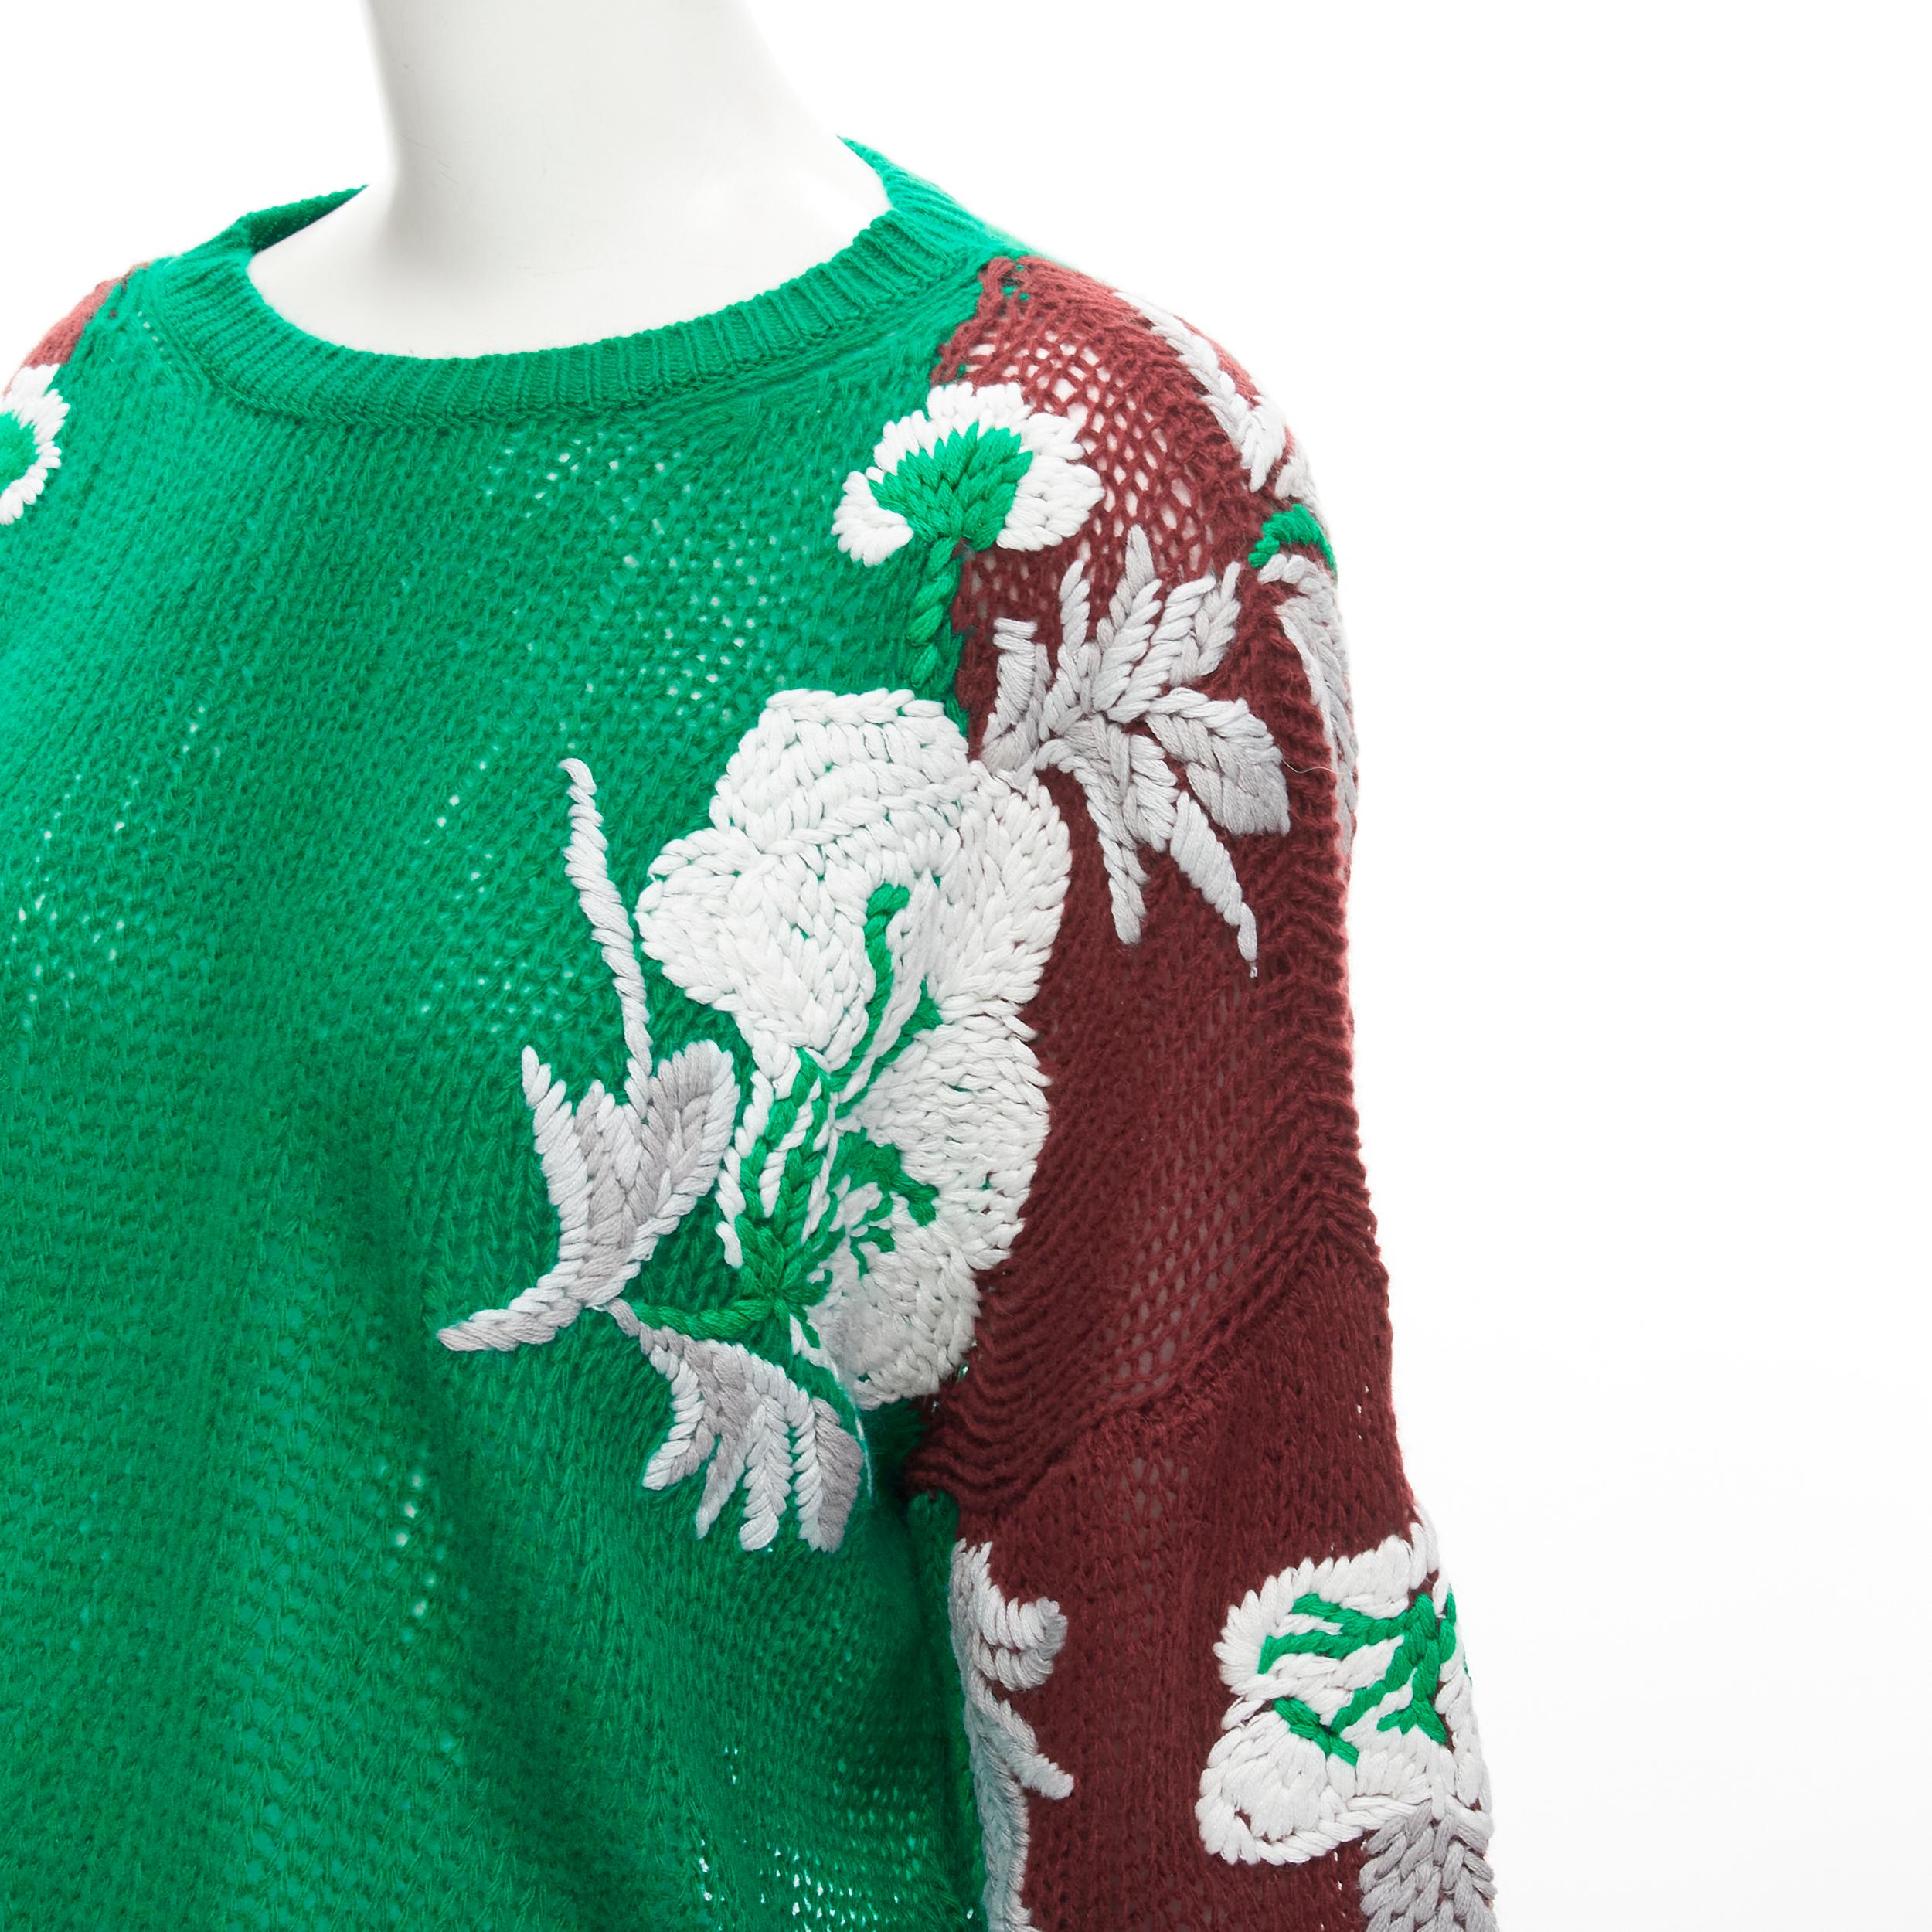 VALENTINO 2022 100% virgin wool green white floral embroidery sleeves sweater S
Brand: Valentino
Material: Virgin Wool
Color: Green
Pattern: Floral
Made in: Italy

CONDITION:
Condition: Excellent, this item was pre-owned and is in excellent